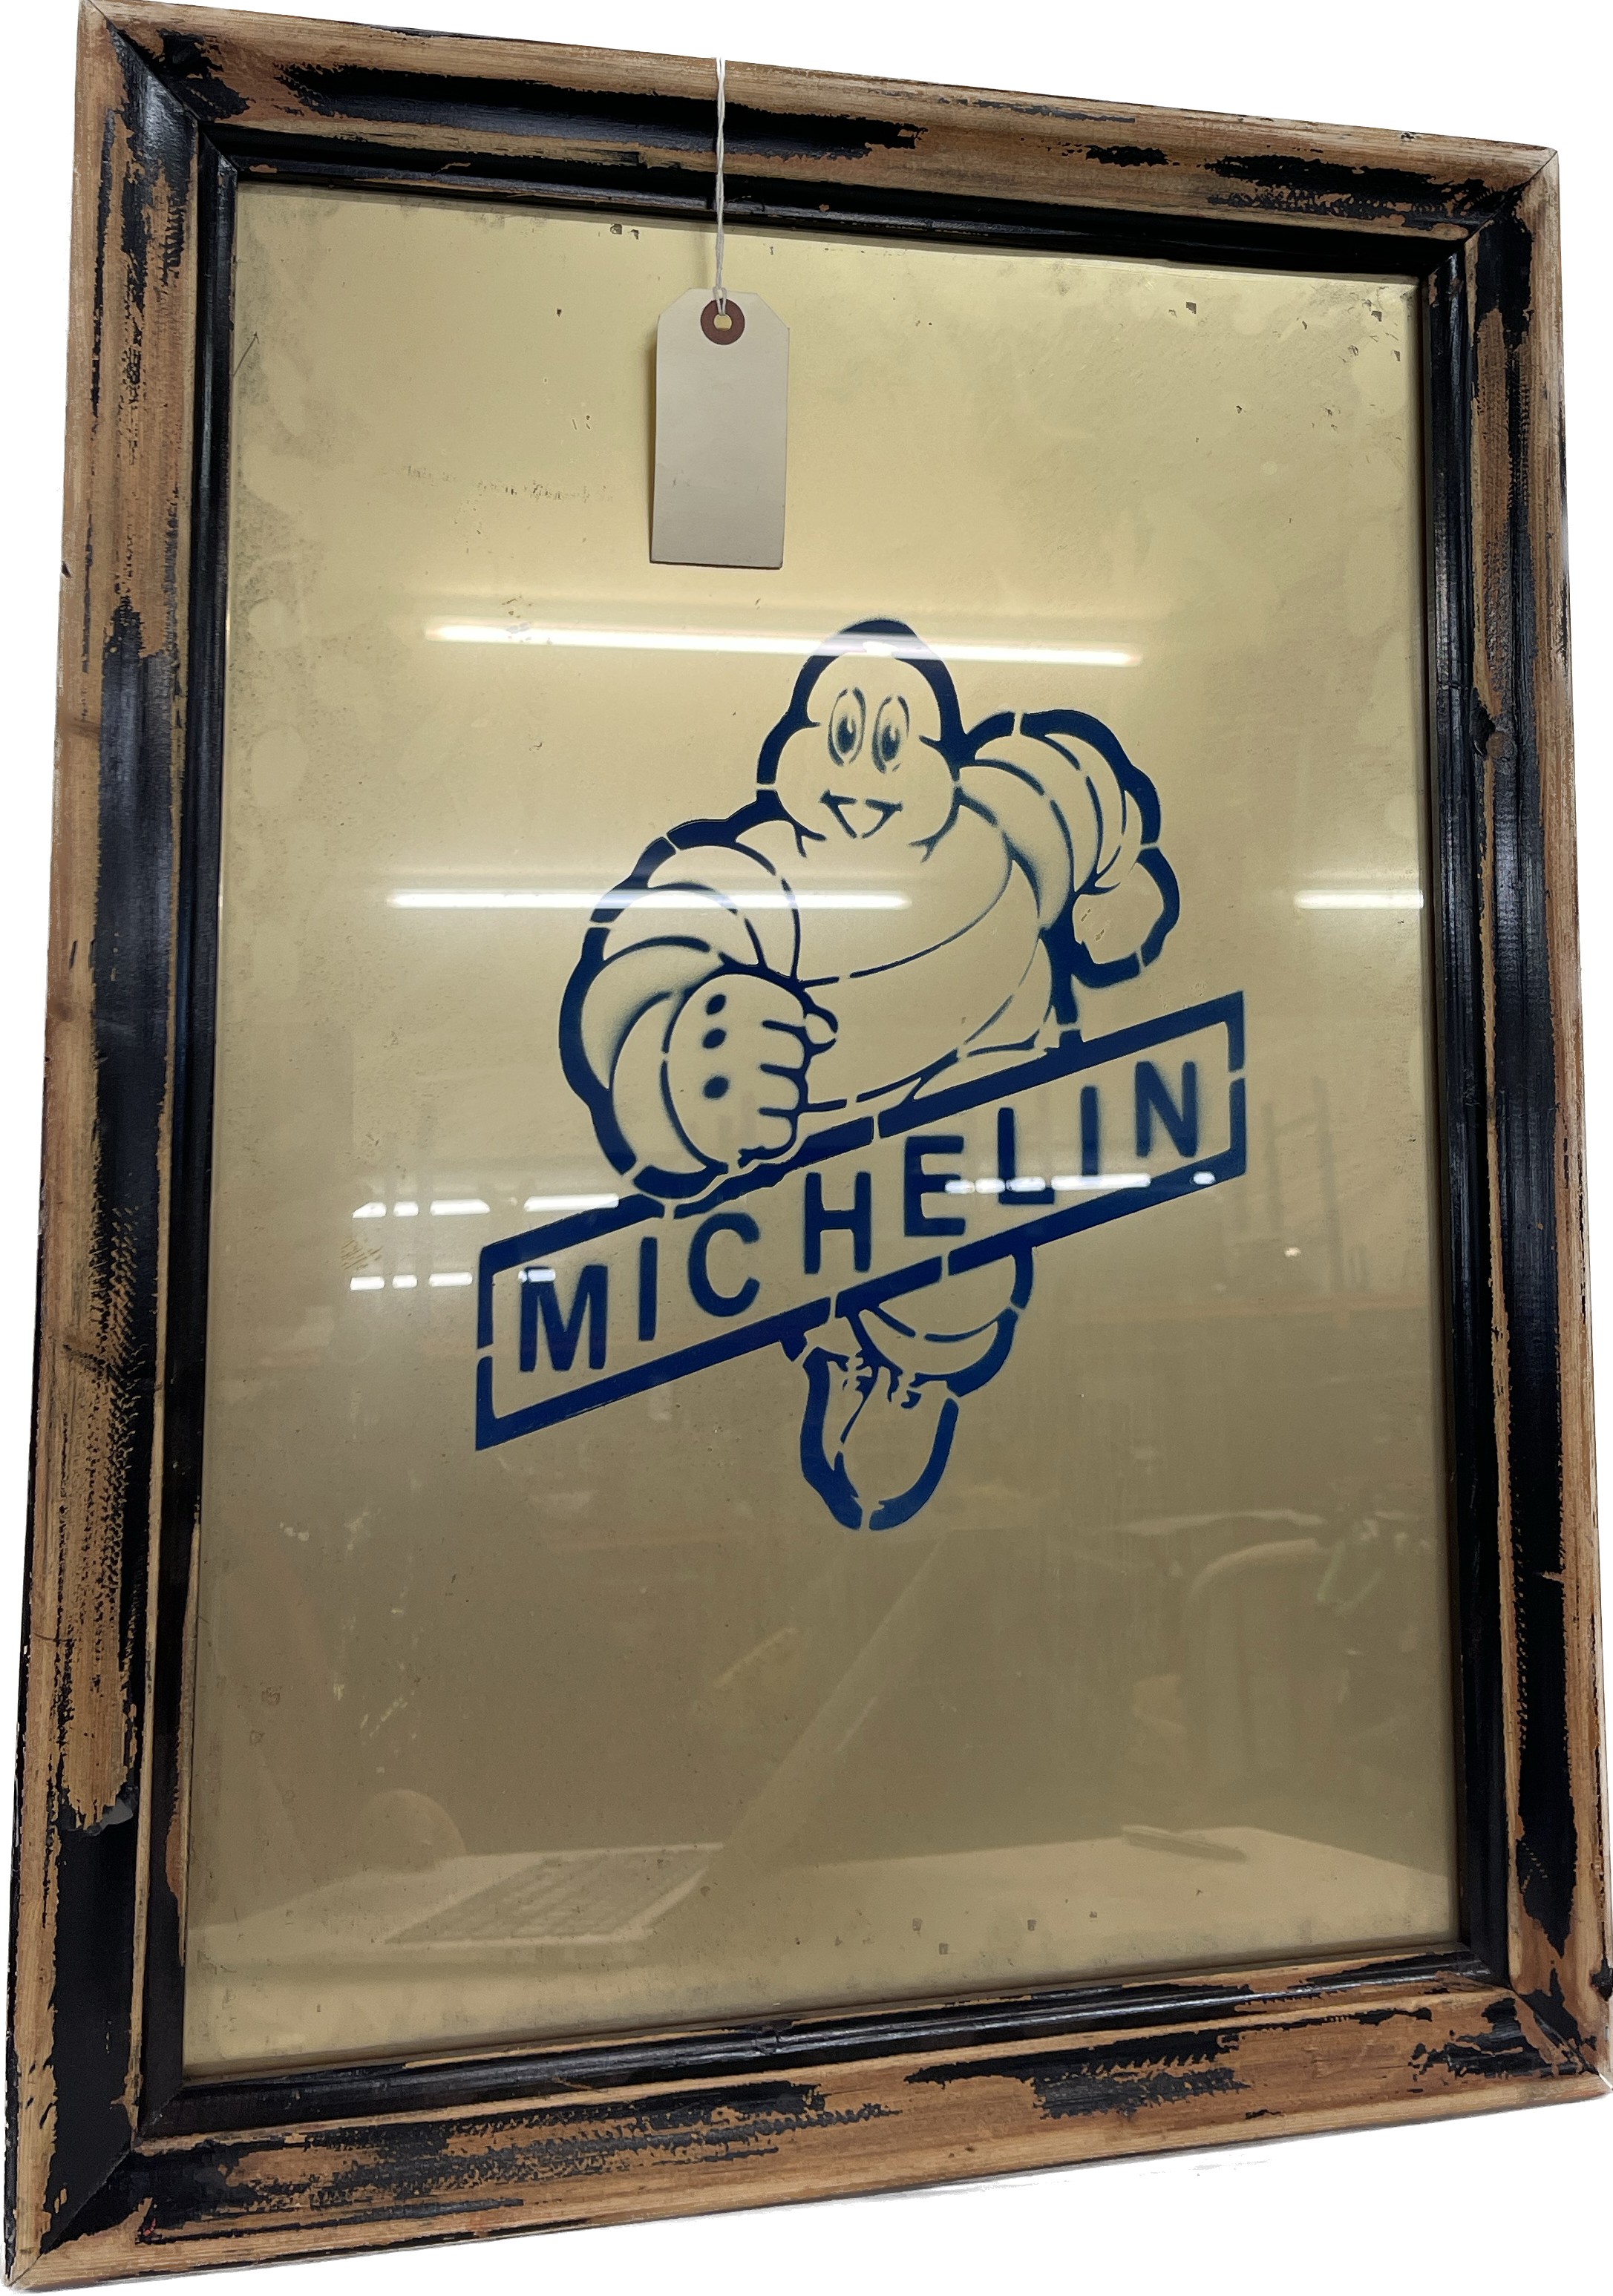 Framed glass advertising Michelin man, frame measures approx 25 inches by 19 inches - Image 3 of 3